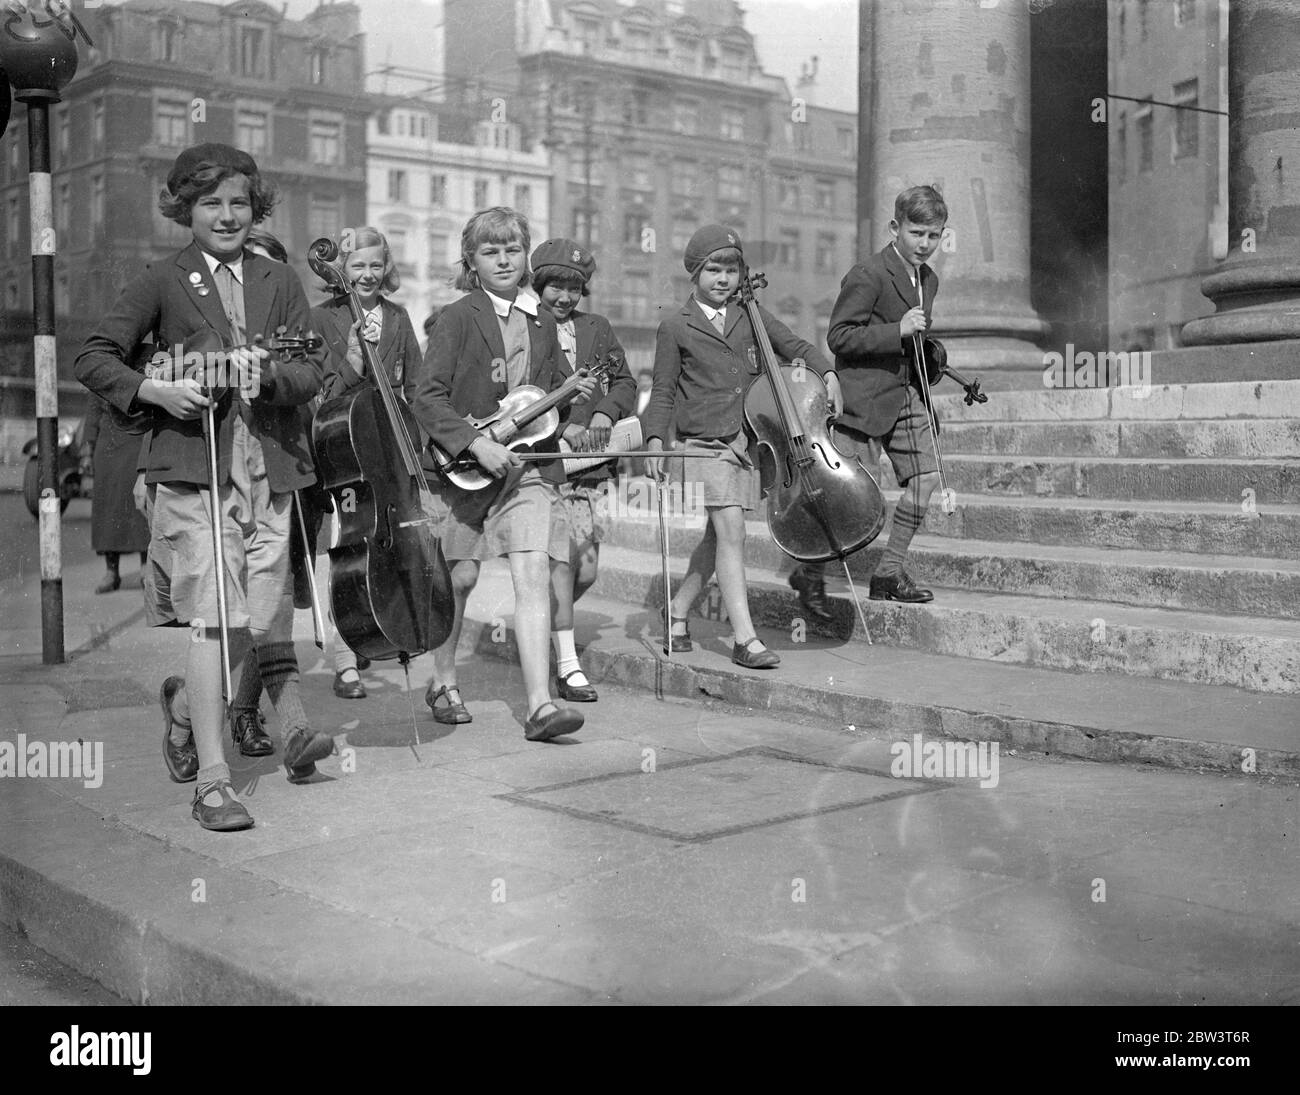 London ' s Musical Children Play At The Queen ' s Hall . Hundreds of young musicians are taking part in the School Orchestra and Junior Band Festival at Queen ' s Hall , London . Photo shows : Childrens arriving with their instruments . 16 May 1936 Stock Photo